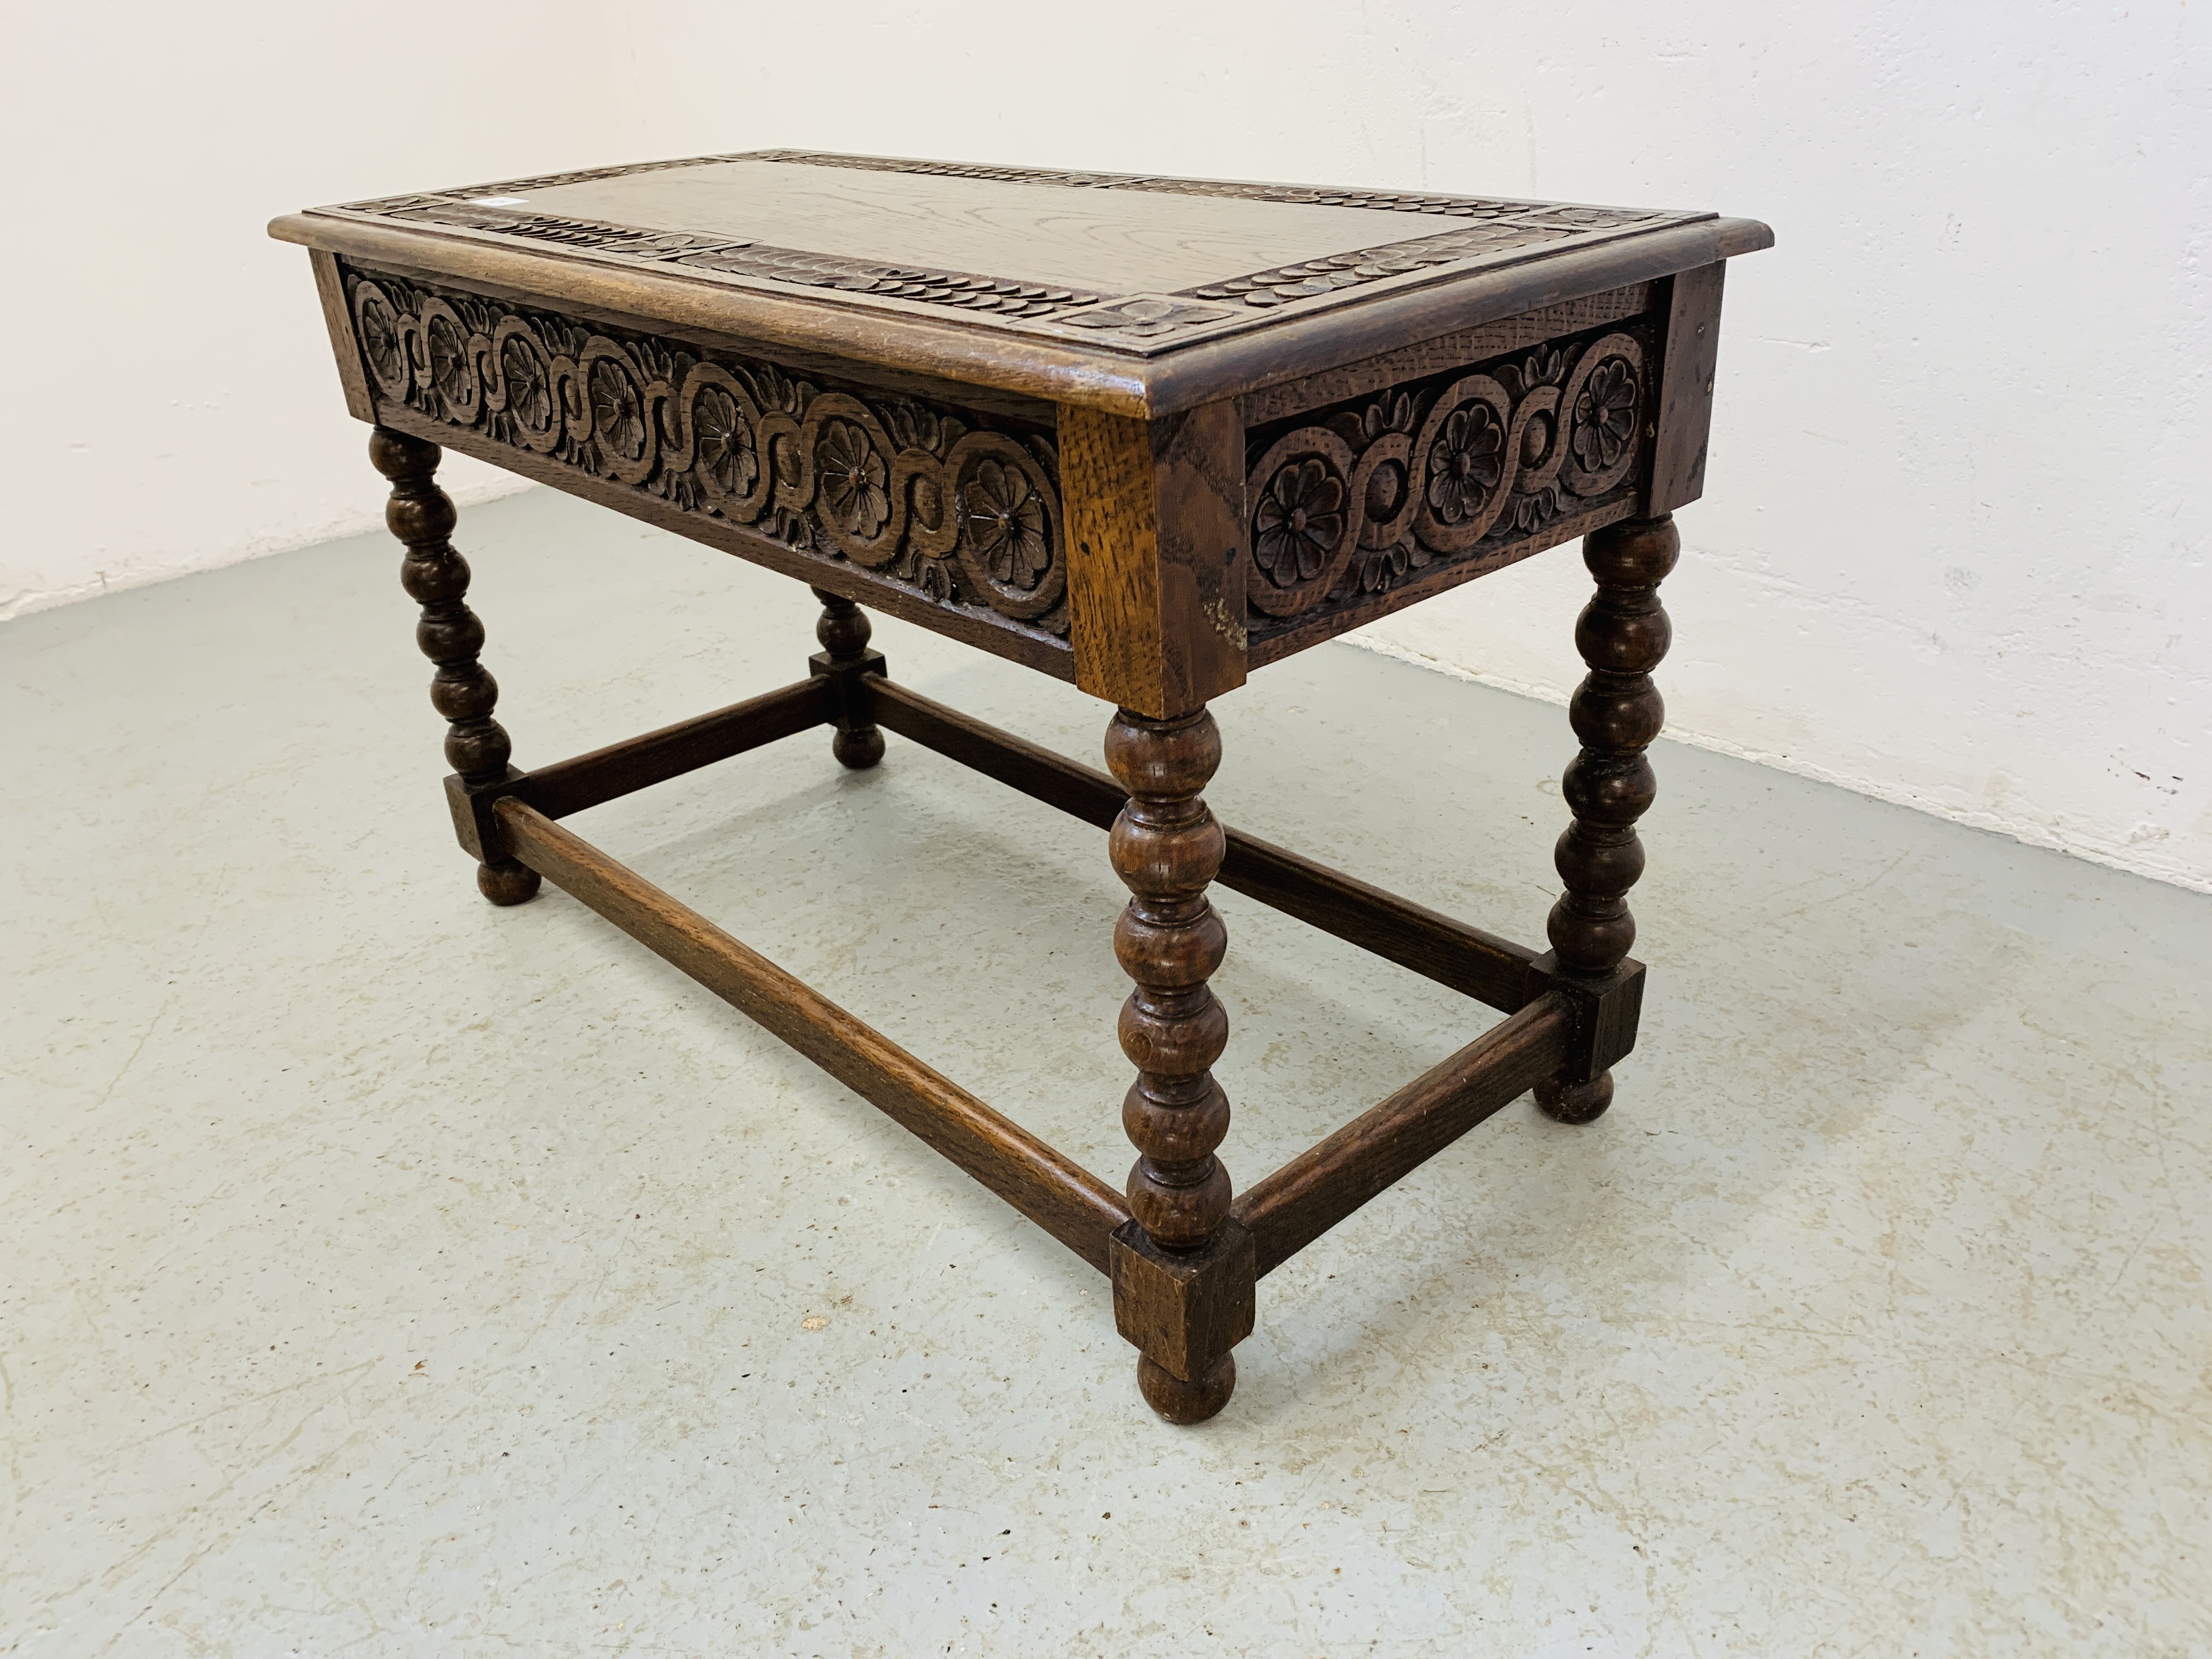 A HAND CARVED OAK SIDE TABLE WITH HINGED TOP AND BOBBIN DETAILED SUPPORTS - W 75CM. D 37CM. H 46CM. - Image 4 of 8